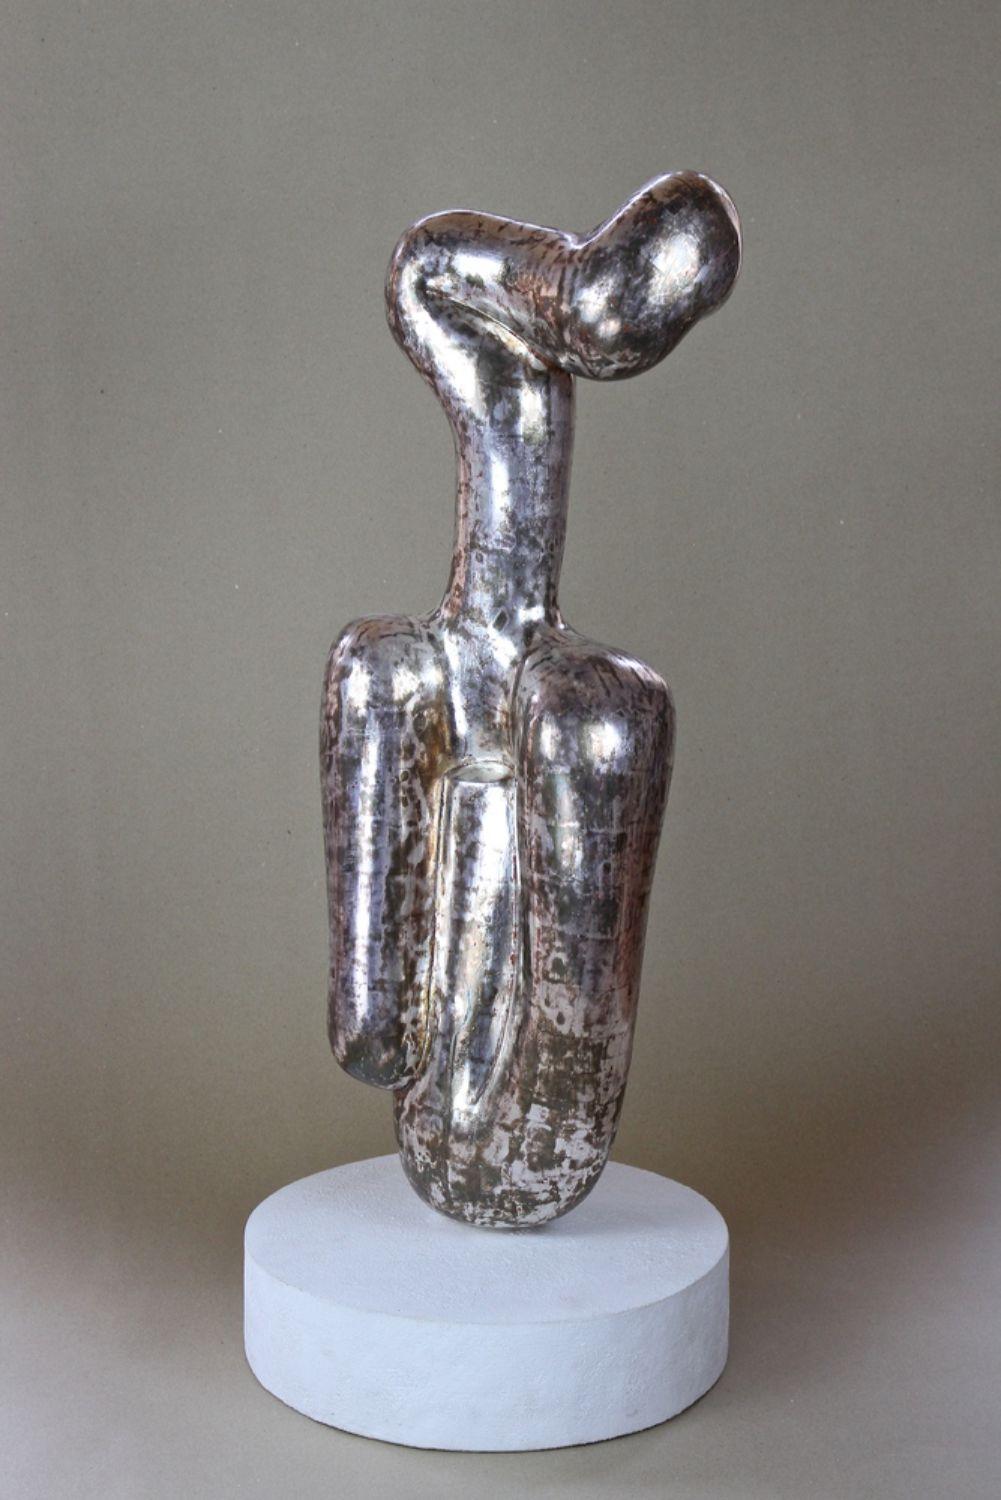 Abstract Contemporary Silvered Sculpture by M. Treml, Handcarved, Austria 2018 For Sale 14